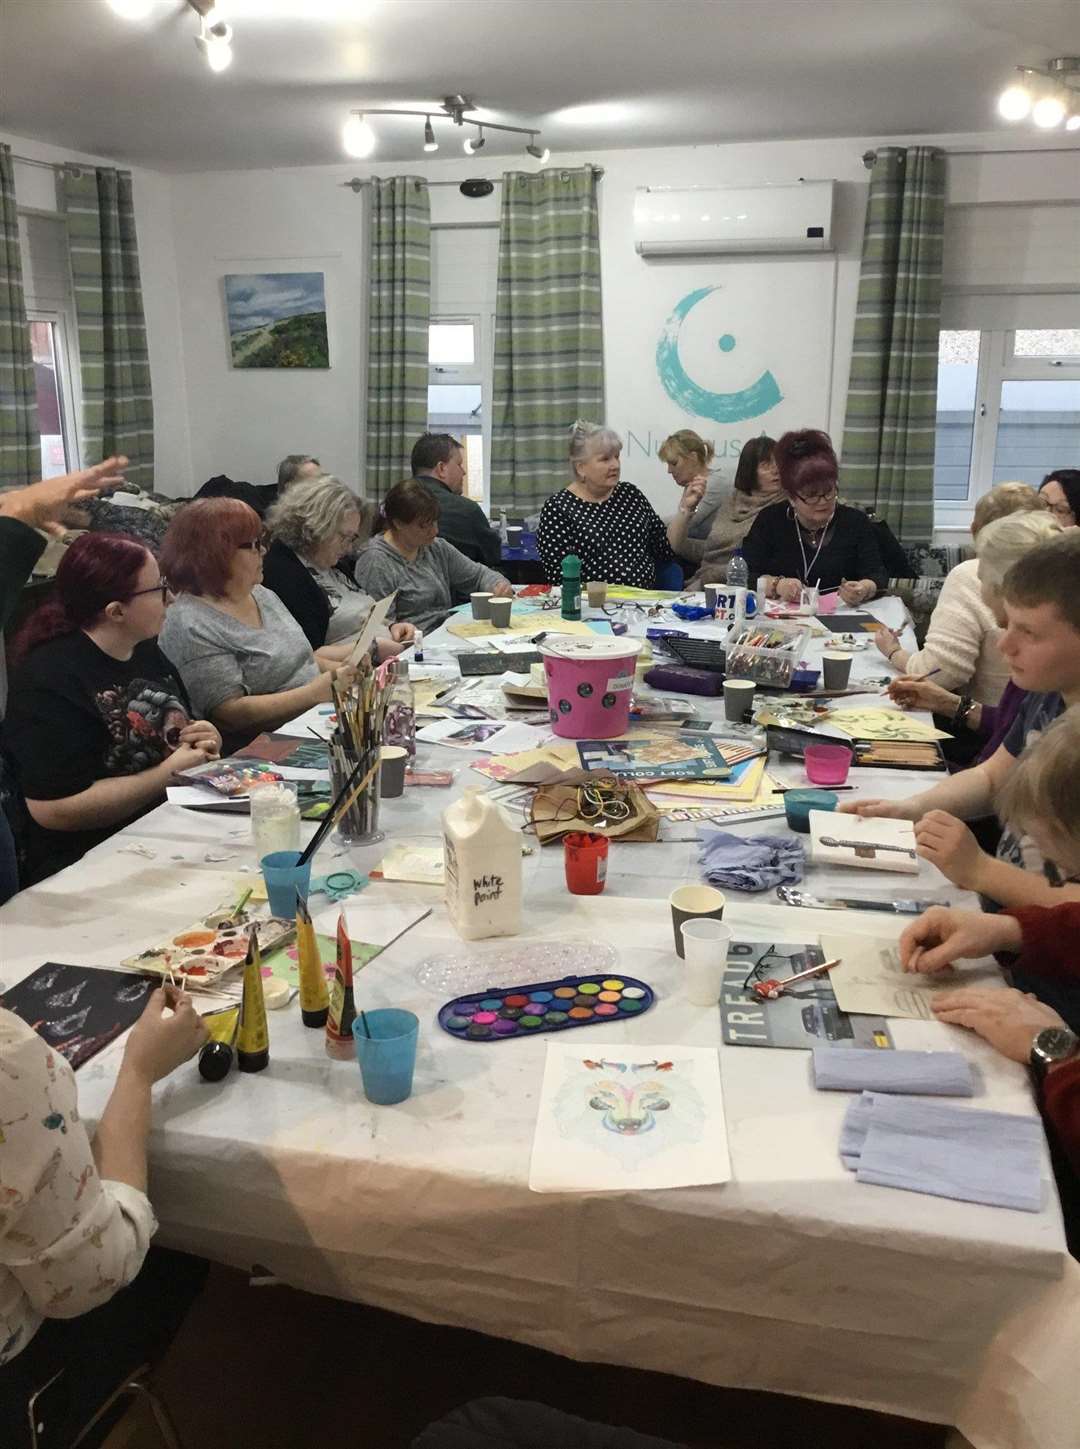 The group at Nucleus Arts' Social Art class, in High Street, Chatham.